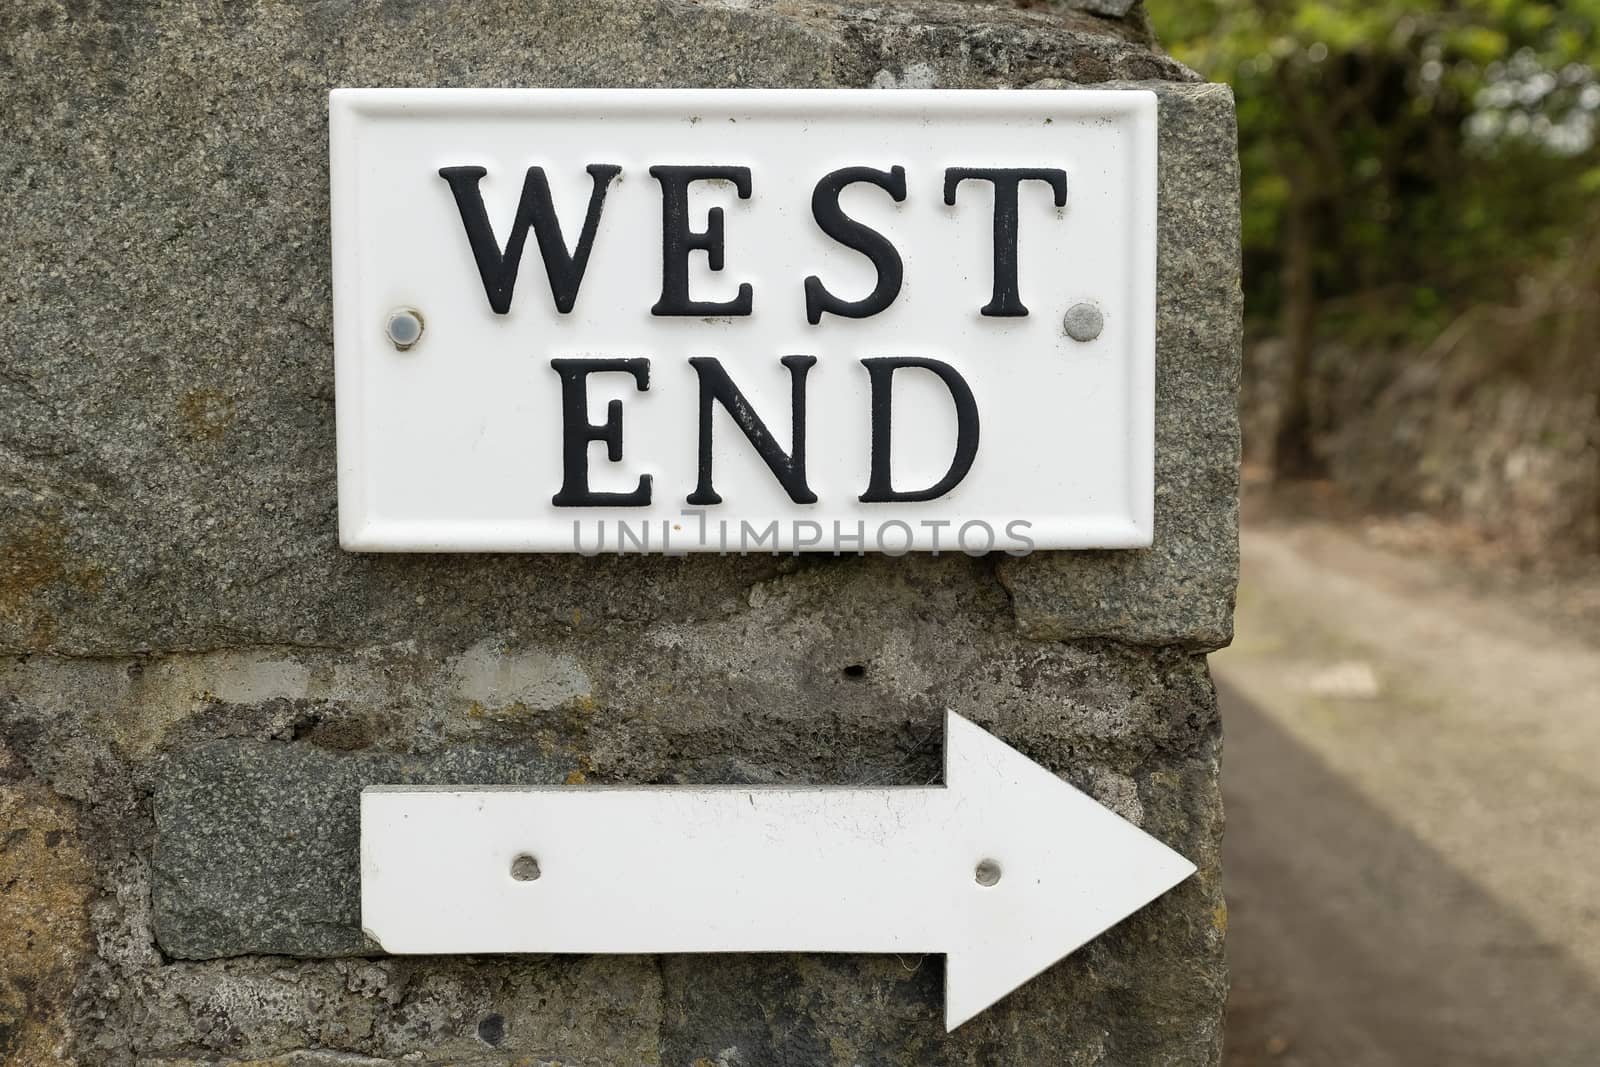 A white rectangular plaque with the words "WEST END" painted in black with a directional arrow underneath.